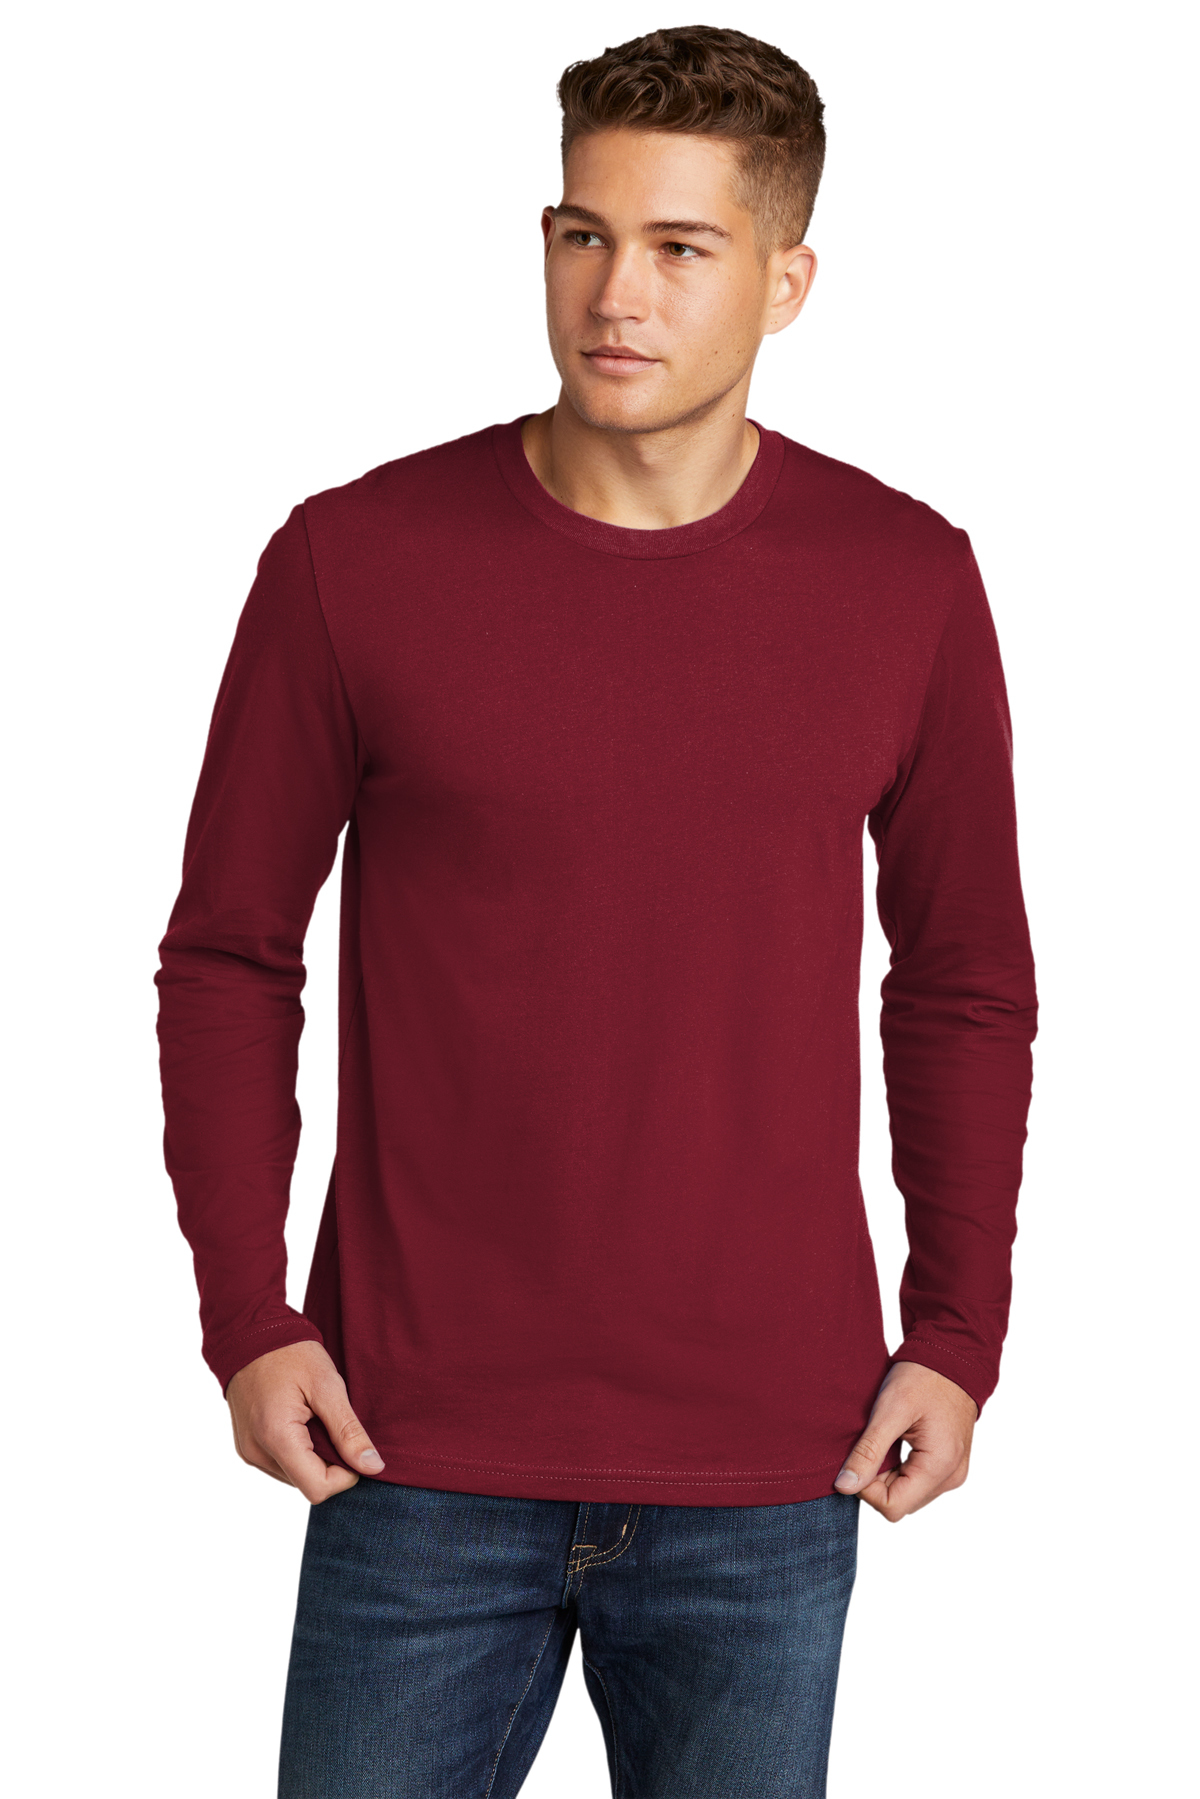 Next Level Apparel Cotton Long Sleeve Tee, Product